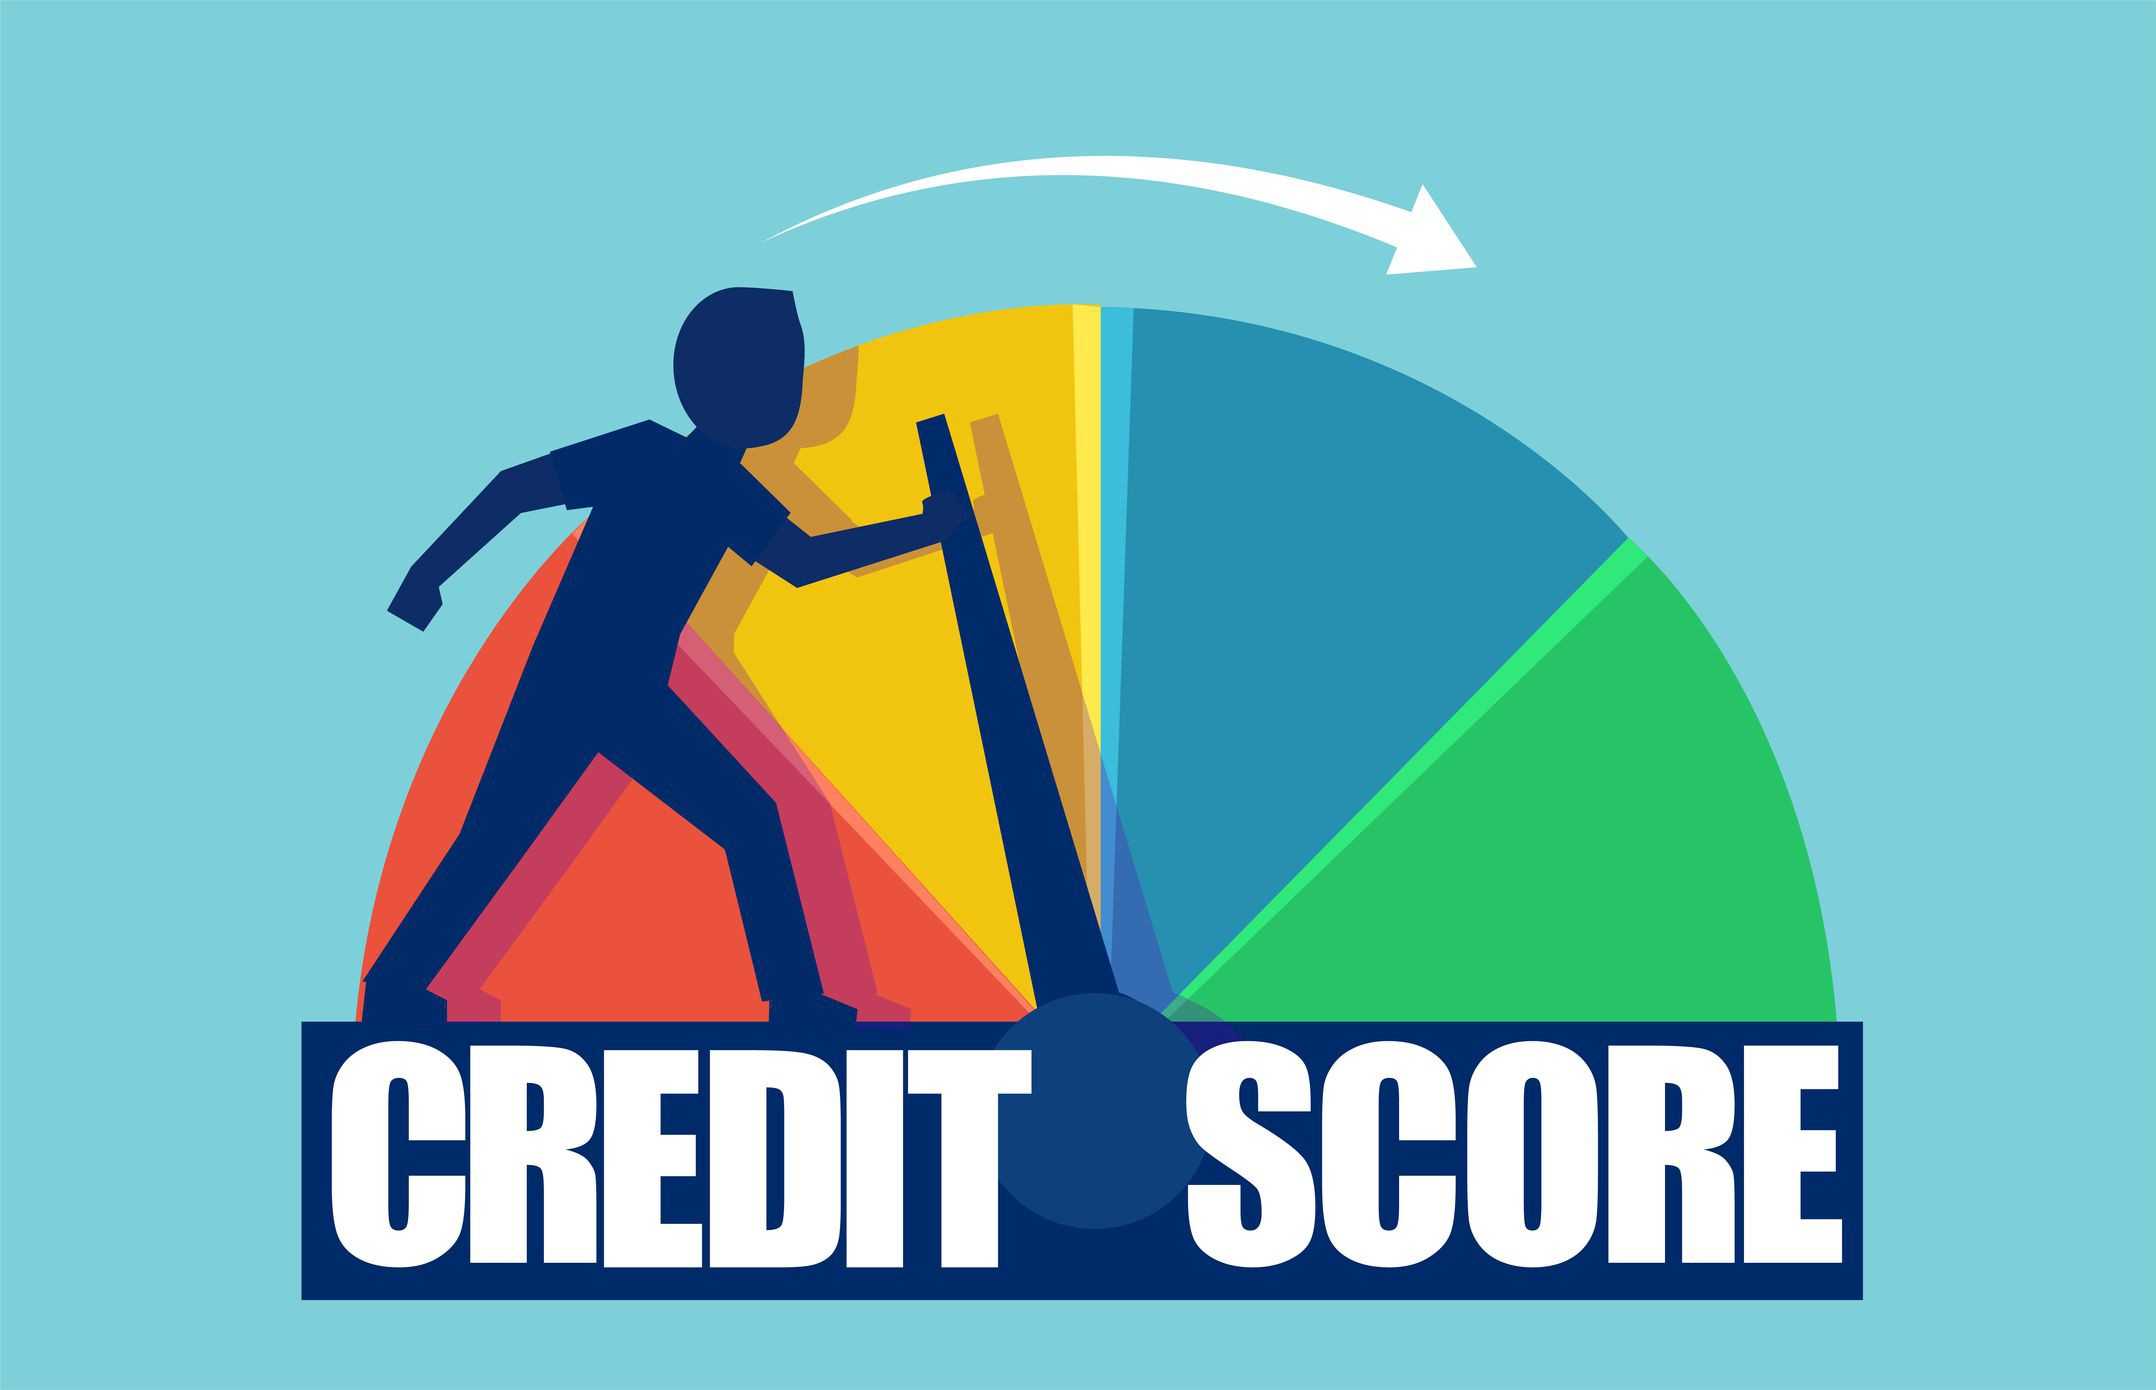 9 TIPS YOU MUST KNOW TO IMPROVE YOUR CREDIT SCORE